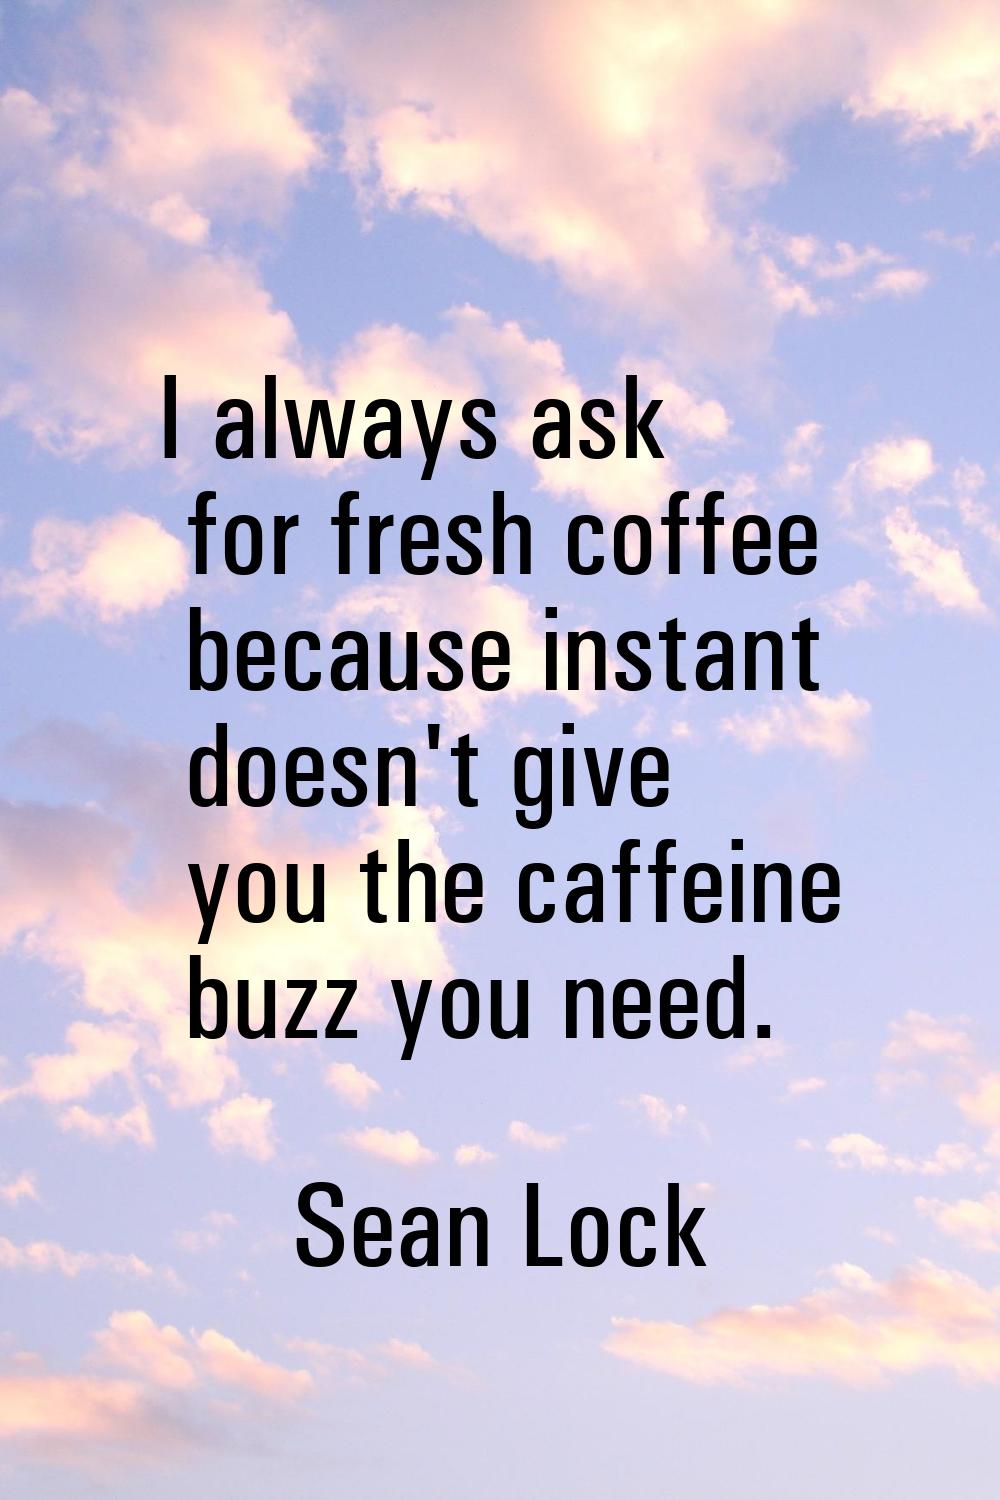 I always ask for fresh coffee because instant doesn't give you the caffeine buzz you need.